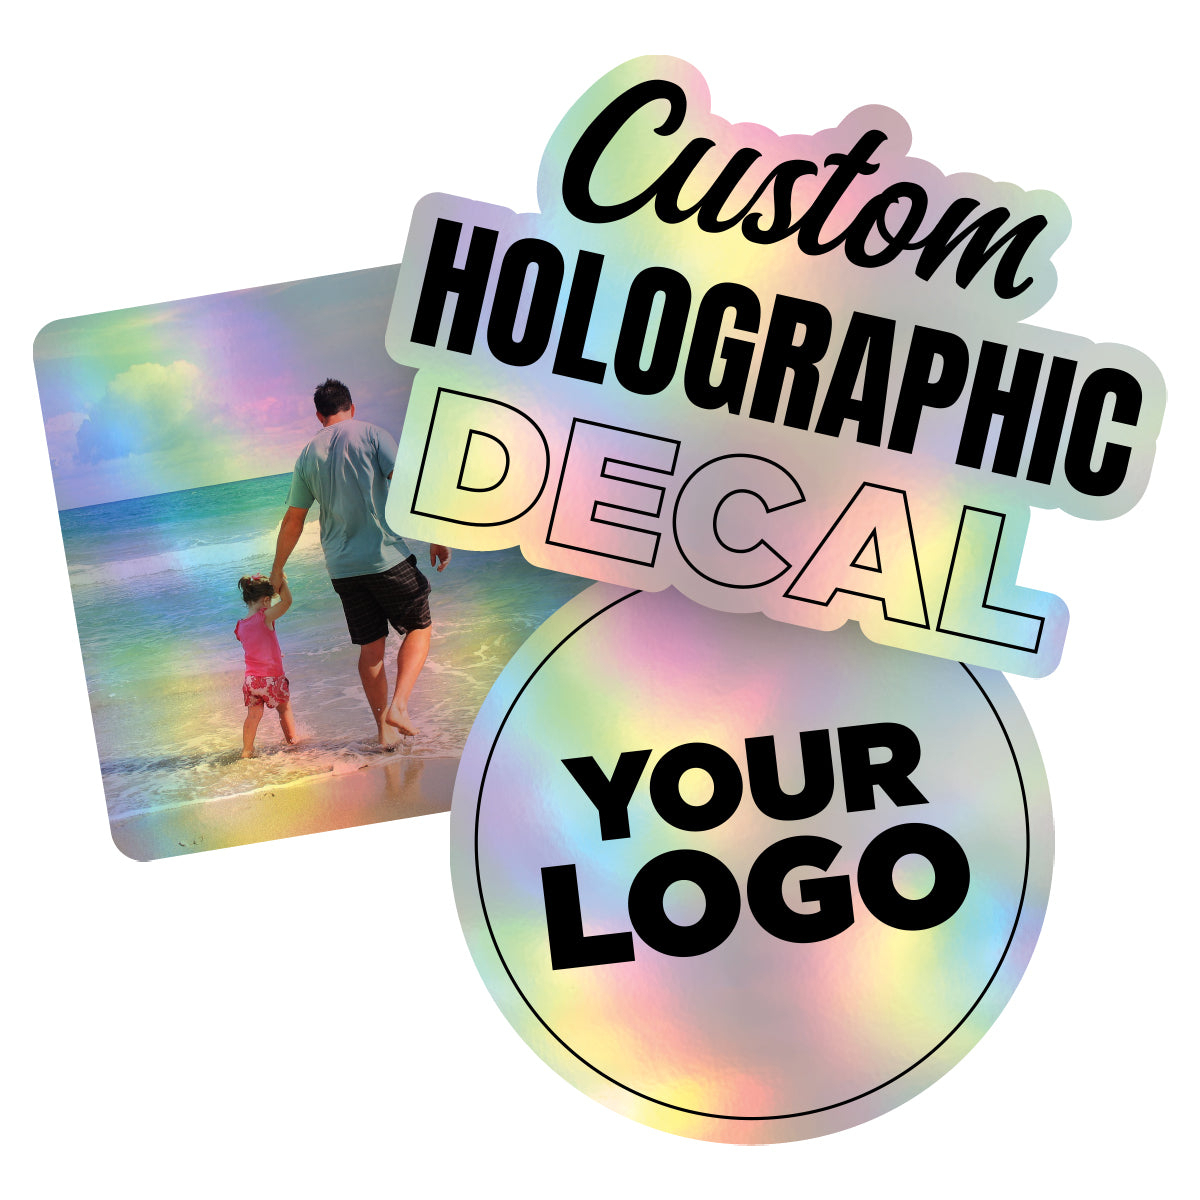 Personalized Holographic Vinyl Sticker Decal Custom Made Any Logo, Image, Text, Or Name Die Cut To Shape - Single, 2 Inch, Circle